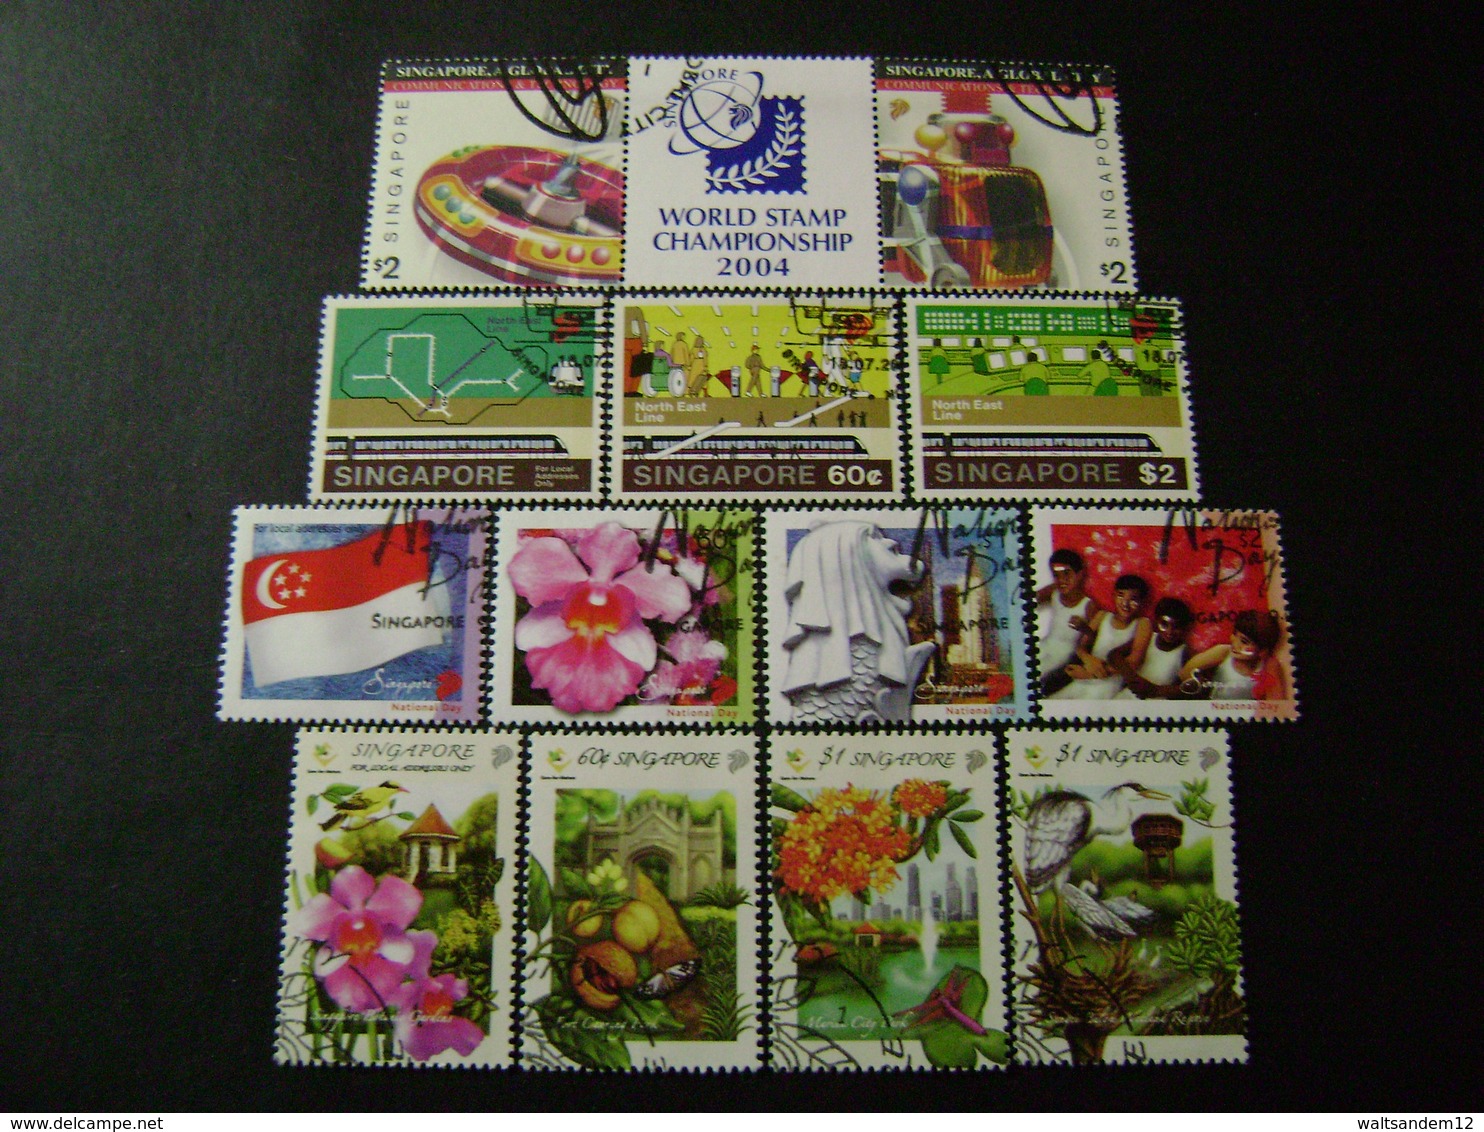 Singapore 2003 Commemorative/special Issues (SG 1262-1271,1273-78,1300-02,1304-07,1309-1328,1351-54) 3 Images - Used - Singapore (1959-...)